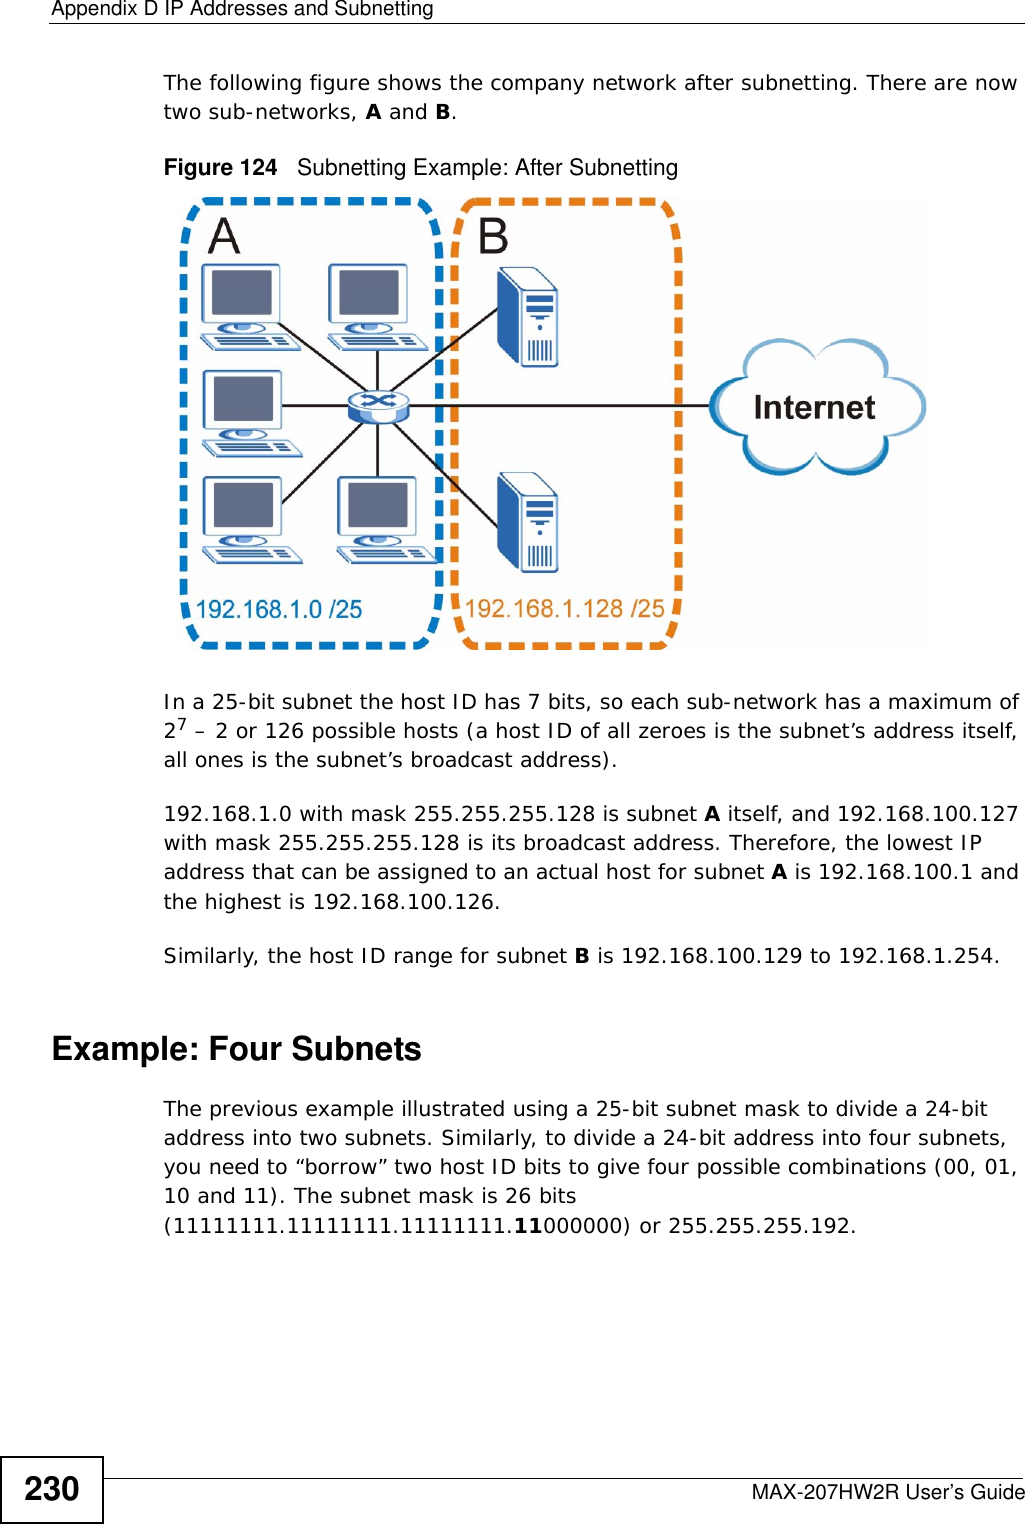 Appendix D IP Addresses and SubnettingMAX-207HW2R User’s Guide230The following figure shows the company network after subnetting. There are now two sub-networks, A and B. Figure 124   Subnetting Example: After SubnettingIn a 25-bit subnet the host ID has 7 bits, so each sub-network has a maximum of 27 – 2 or 126 possible hosts (a host ID of all zeroes is the subnet’s address itself, all ones is the subnet’s broadcast address).192.168.1.0 with mask 255.255.255.128 is subnet A itself, and 192.168.100.127 with mask 255.255.255.128 is its broadcast address. Therefore, the lowest IP address that can be assigned to an actual host for subnet A is 192.168.100.1 and the highest is 192.168.100.126. Similarly, the host ID range for subnet B is 192.168.100.129 to 192.168.1.254.Example: Four Subnets The previous example illustrated using a 25-bit subnet mask to divide a 24-bit address into two subnets. Similarly, to divide a 24-bit address into four subnets, you need to “borrow” two host ID bits to give four possible combinations (00, 01, 10 and 11). The subnet mask is 26 bits (11111111.11111111.11111111.11000000) or 255.255.255.192. 